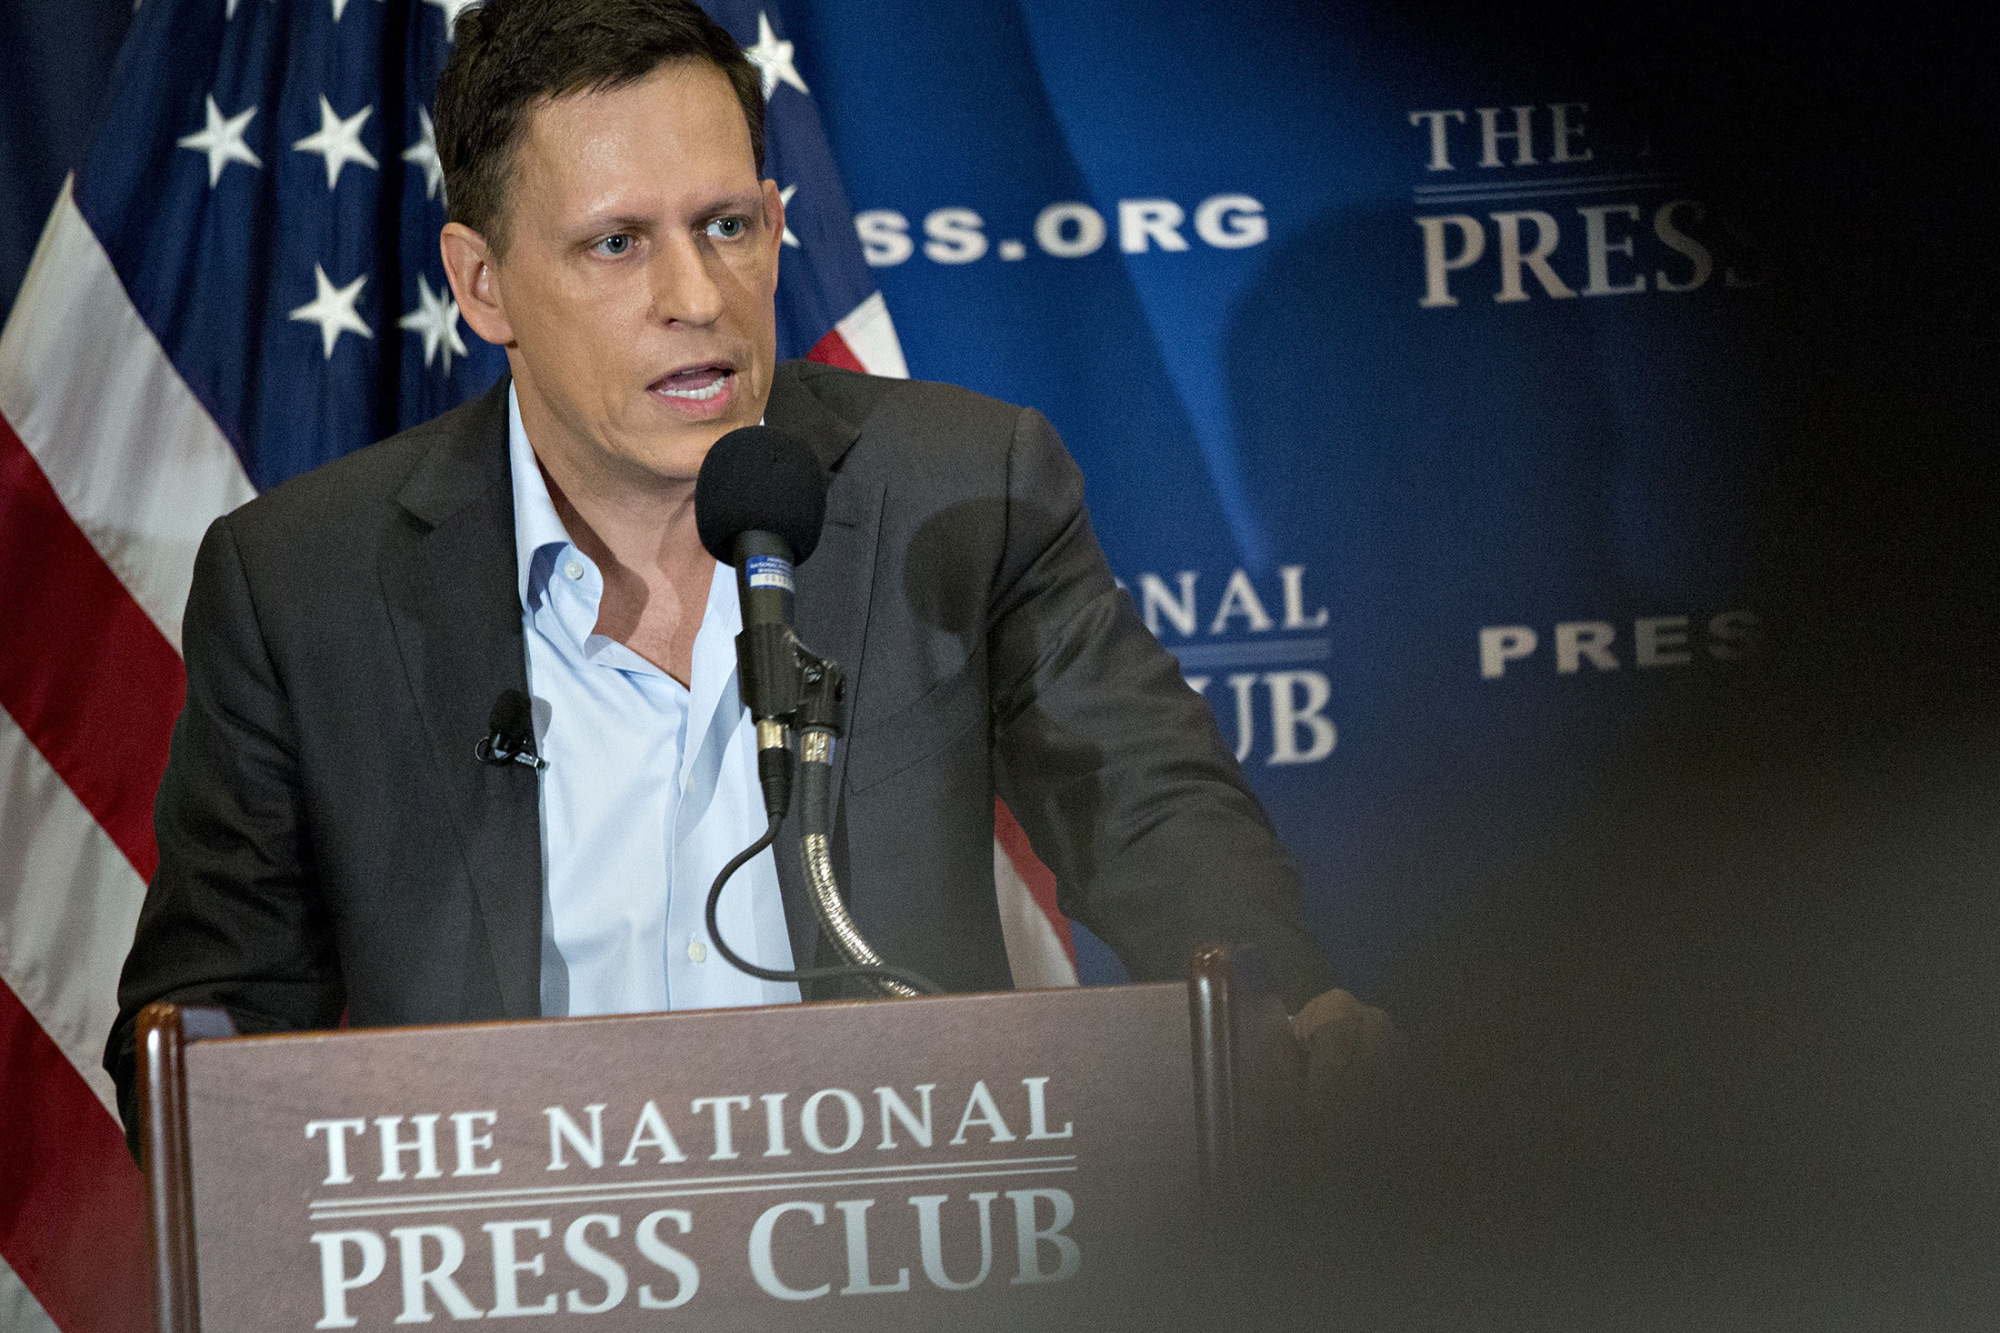 This week, Peter Thiel called Gawker a "singularly sociopathic bully," which is also an apt description for the Presidential candidate he supports.